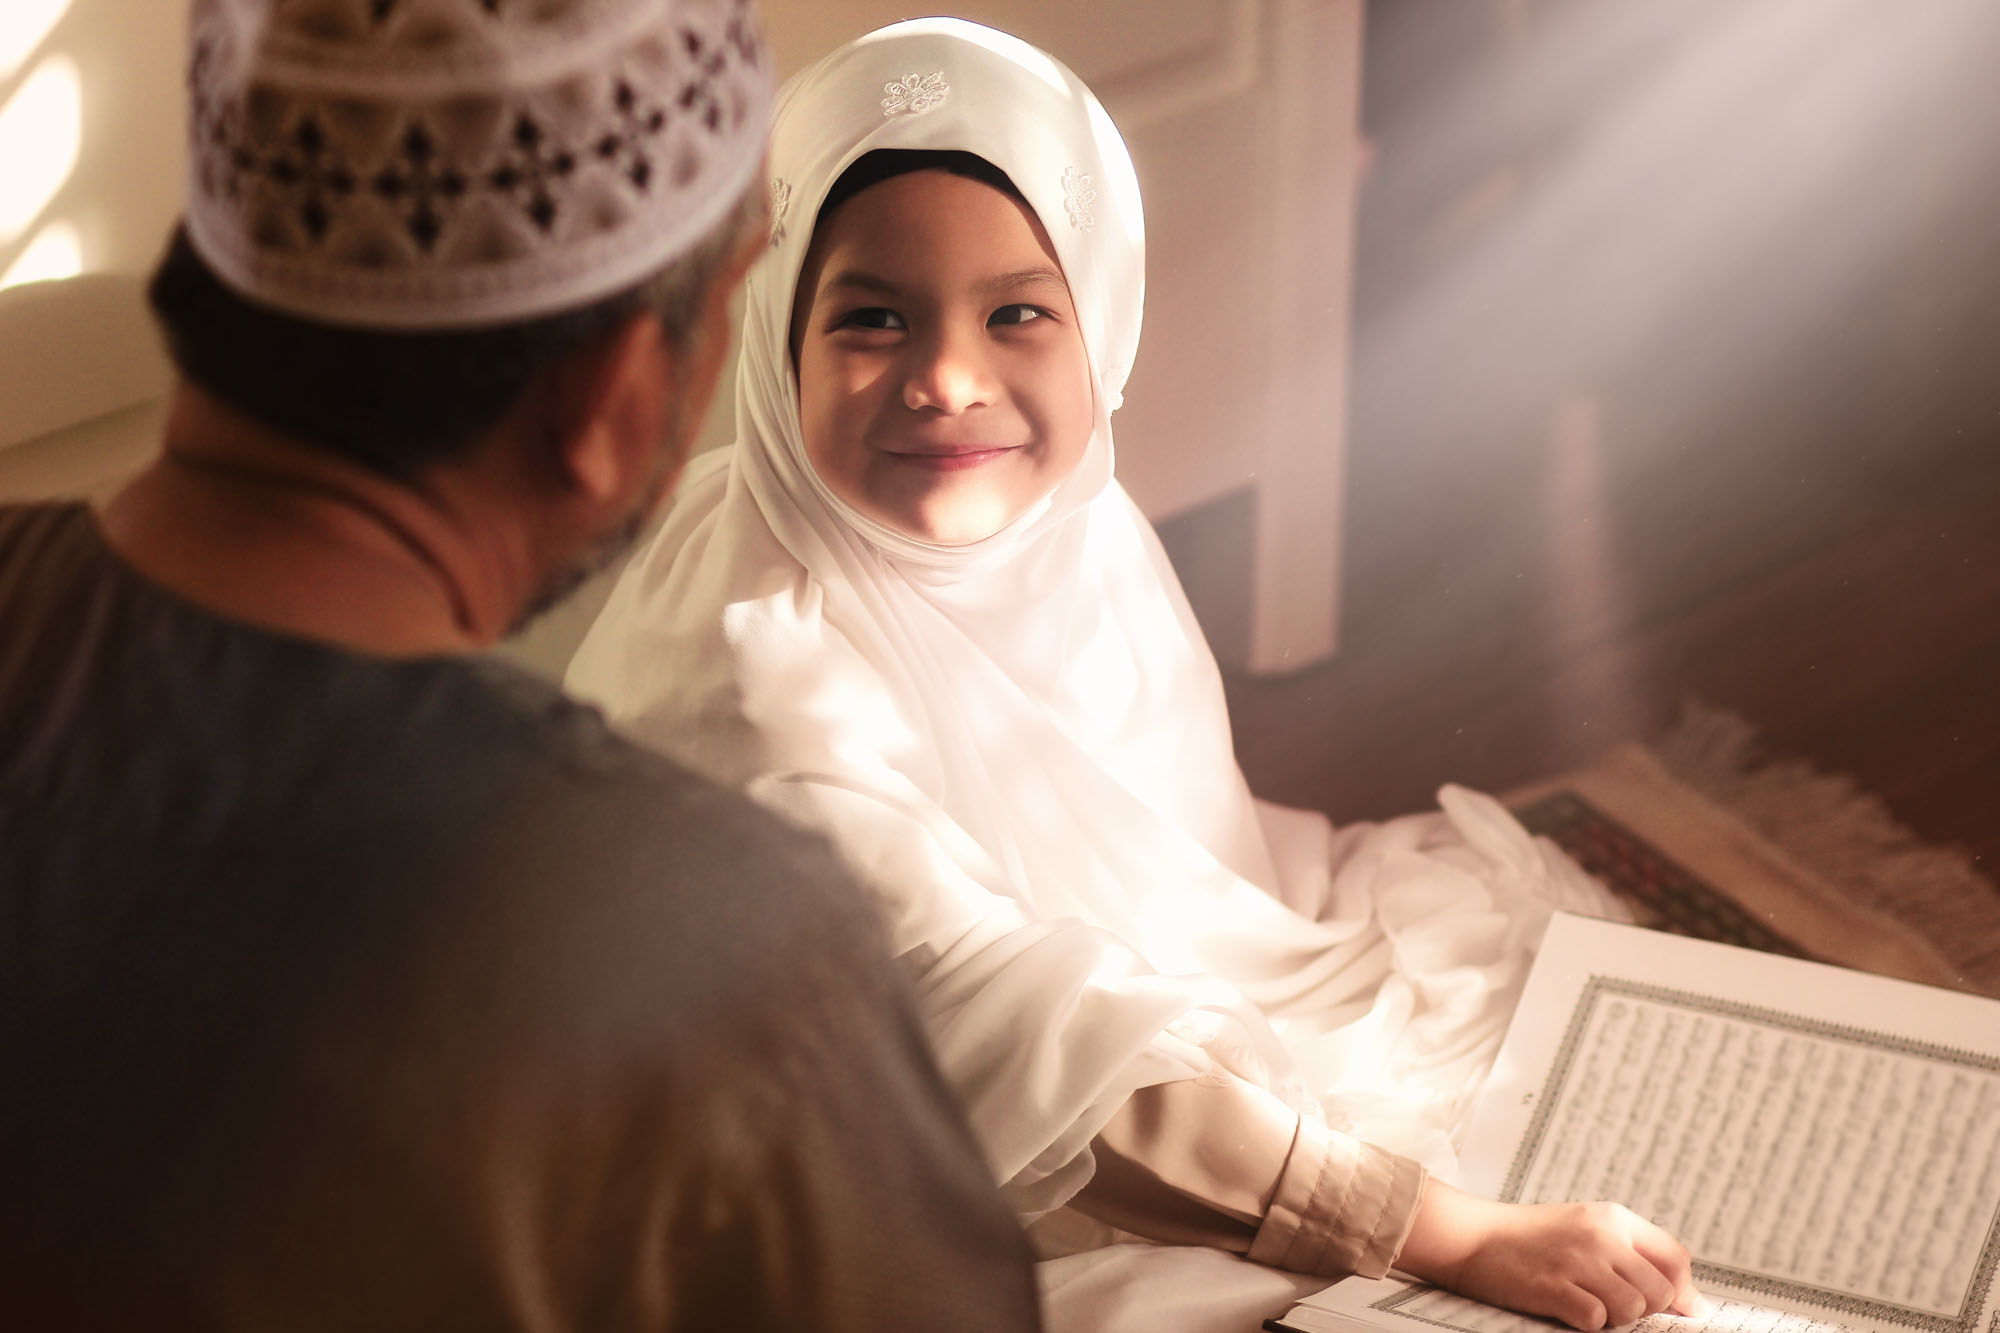 Religious Asian Muslim Man teaching his 6 years old daughter to learn the Quran and study Islam after pray to God at home .Sunset light shining through the window.Peaceful and Marvelous warm climate.